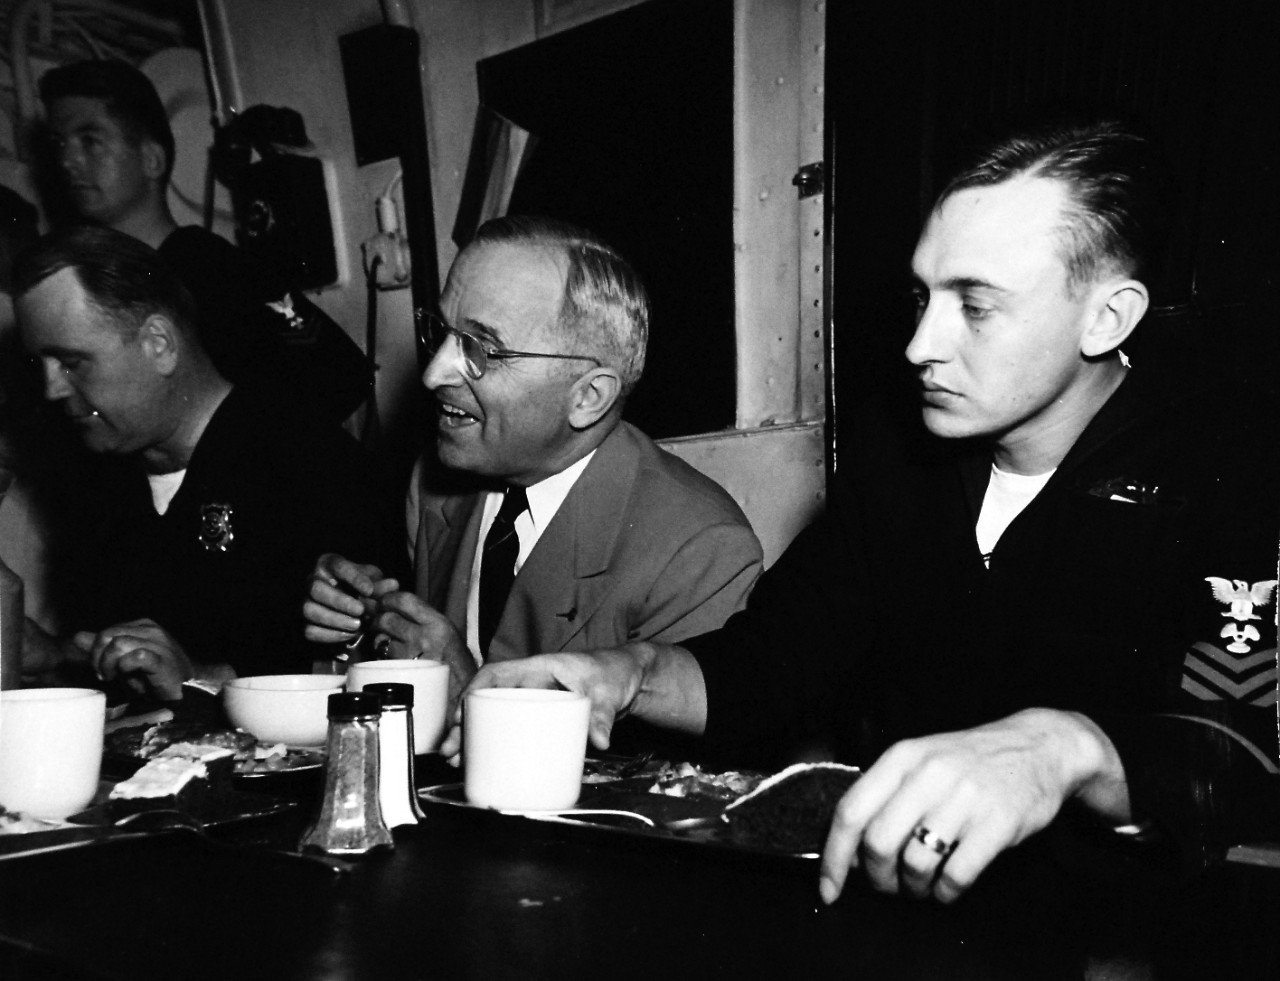 80-G-700298:   Potsdam Conference, July-August 1945.  President Harry S. Truman and party onboard USS Augusta (CA-31) for return voyage from the Potsdam Conference.  The President has chow with the crew:  Esmond J. Clifford, USNR (standing), George T. Fleming, USNR, the President, and J.C. Roaseau, USN.   Photograph released:  August 1945.  Official U.S. Navy photograph, now in the collections of the National Archives.  (2016/06/28).